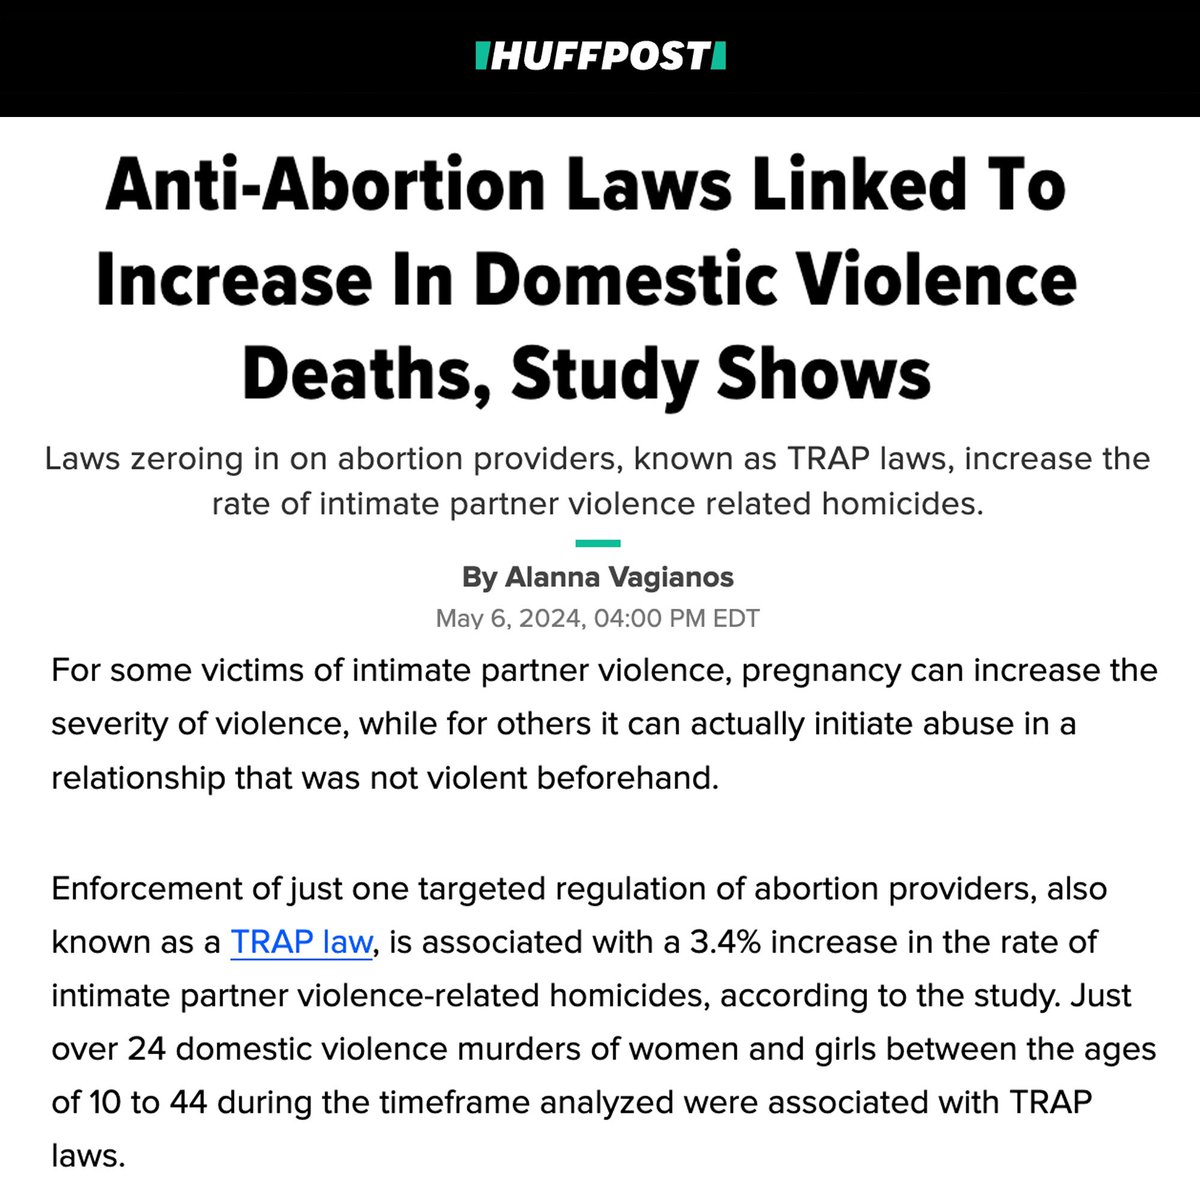 Murder by an abusive partner is the leading cause of death for pregnant and postpartum women in the US, and Republicans’ restrictive abortion laws increase the likelihood that pregnant victims of domestic violence will be murdered by their abusive partner.

Now read that again.